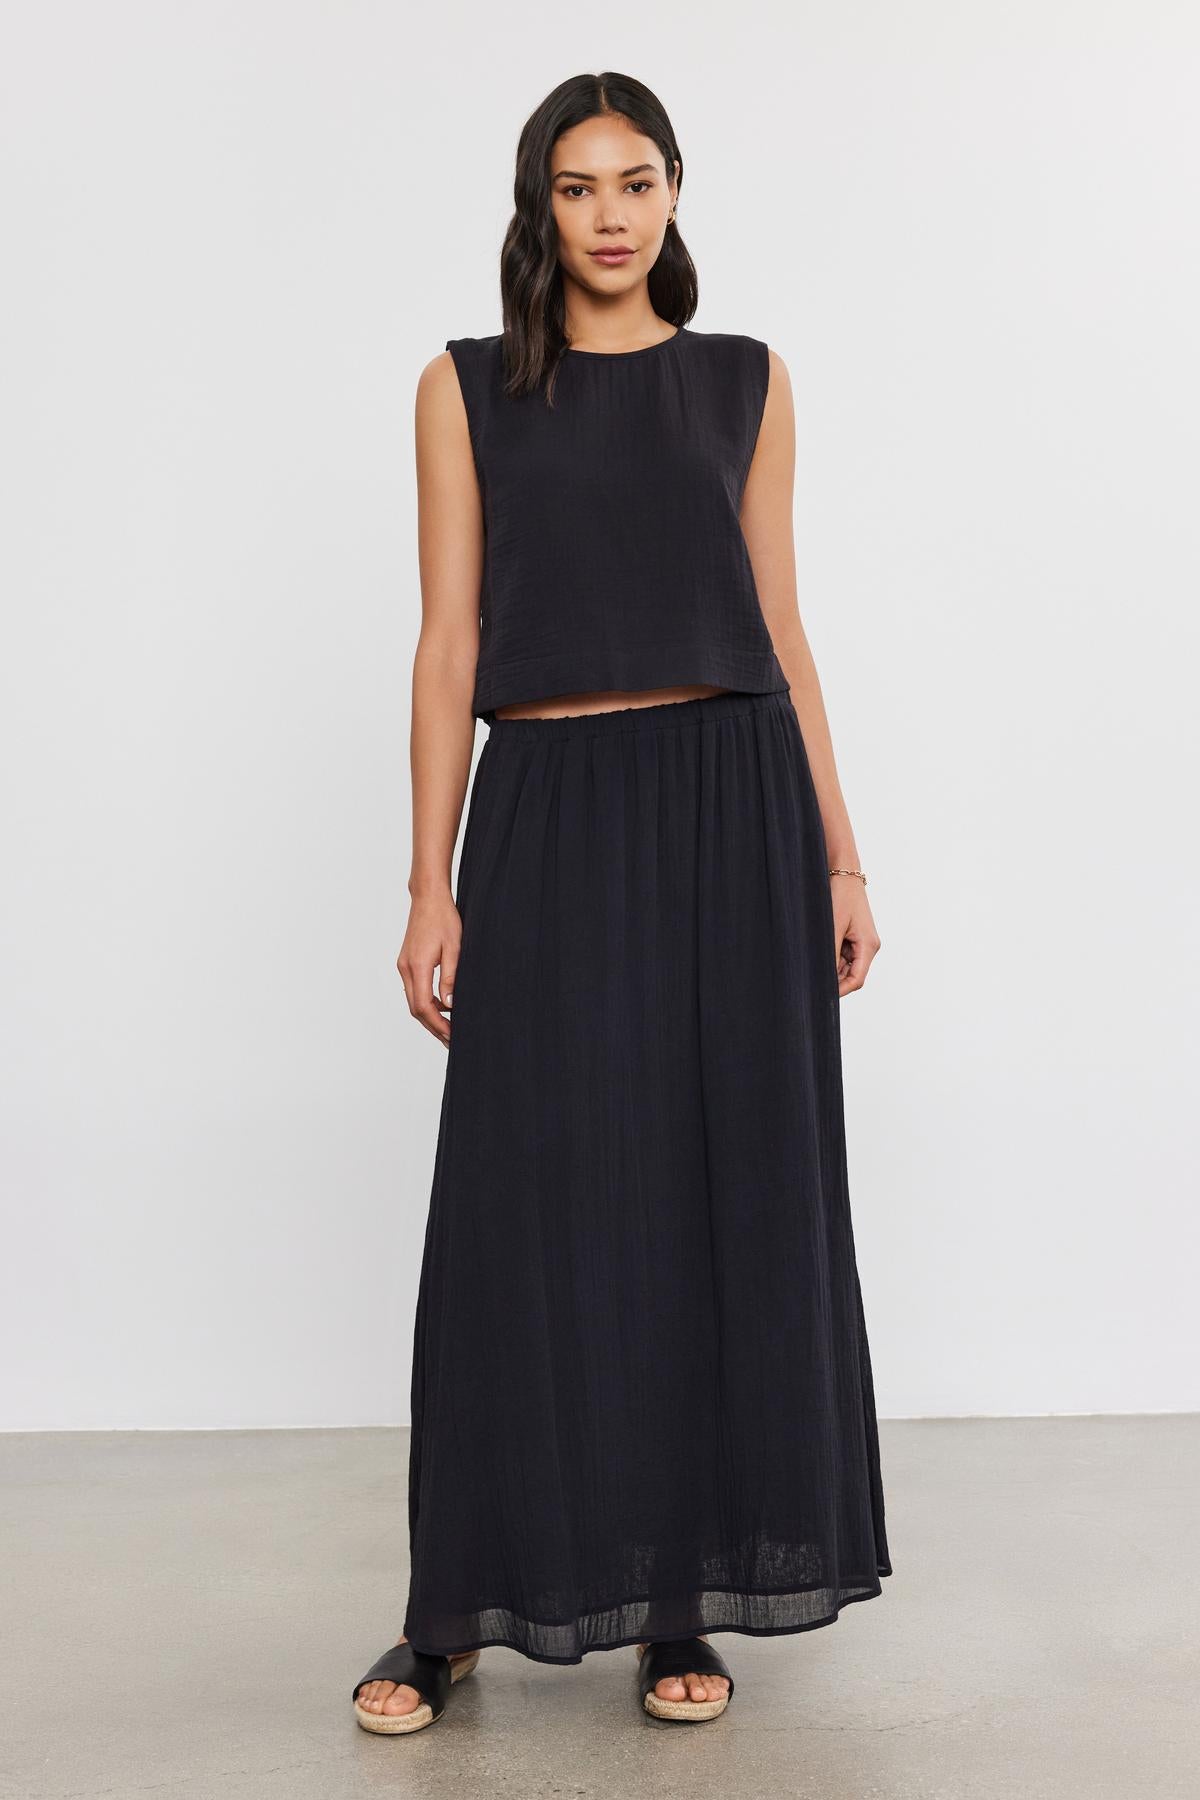 A woman in a black sleeveless crop top and a long, flowing Velvet by Graham & Spencer INDY COTTON GAUZE SKIRT stands against a plain background, looking directly at the camera.-36910122533057